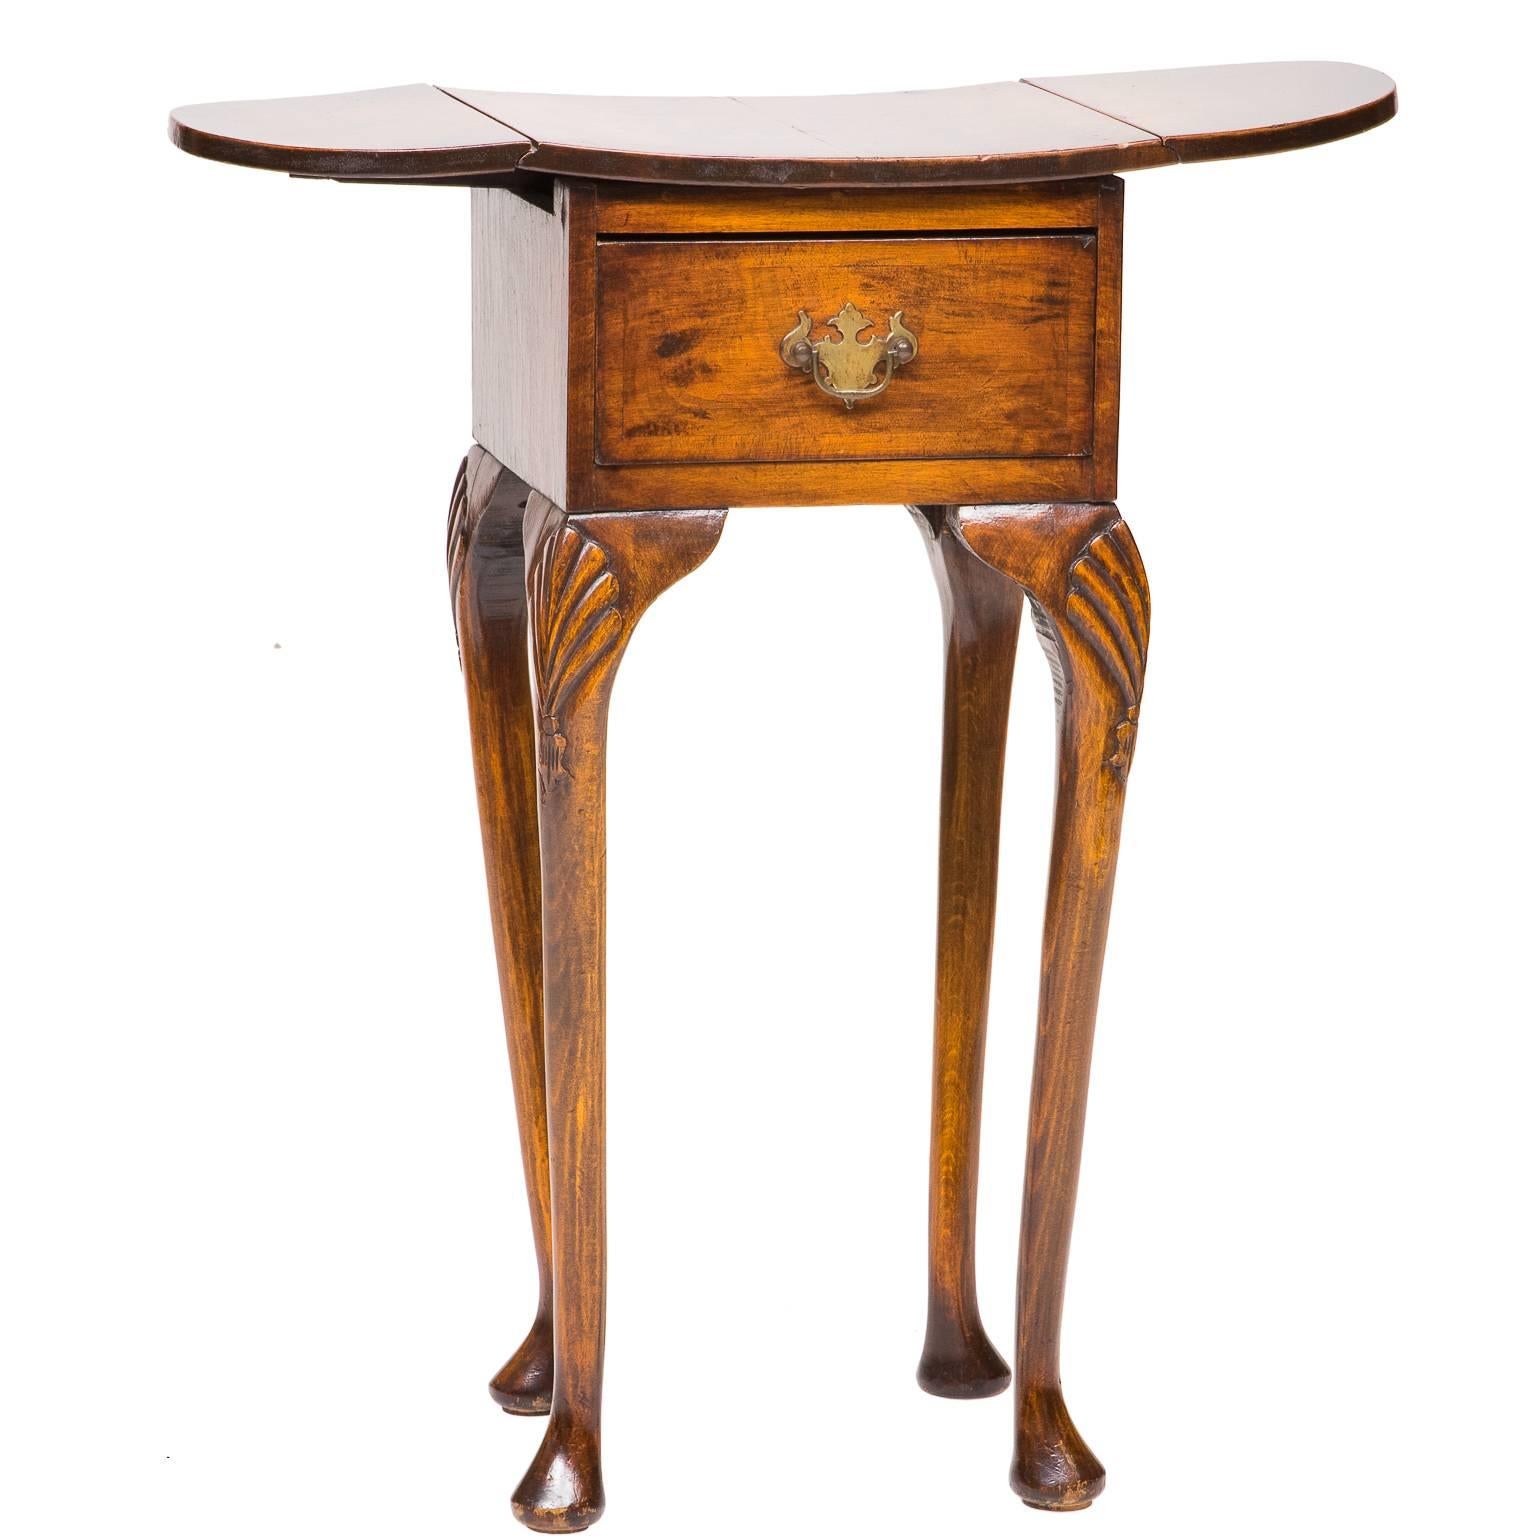 19th century Queen Anne walnut and burl walnut side table with drop leaves and leaf supports. There is one drawer (functional). The top is designed with a slight concave feature. Four cabriole legs with shell carved knees and ending with pad feet.